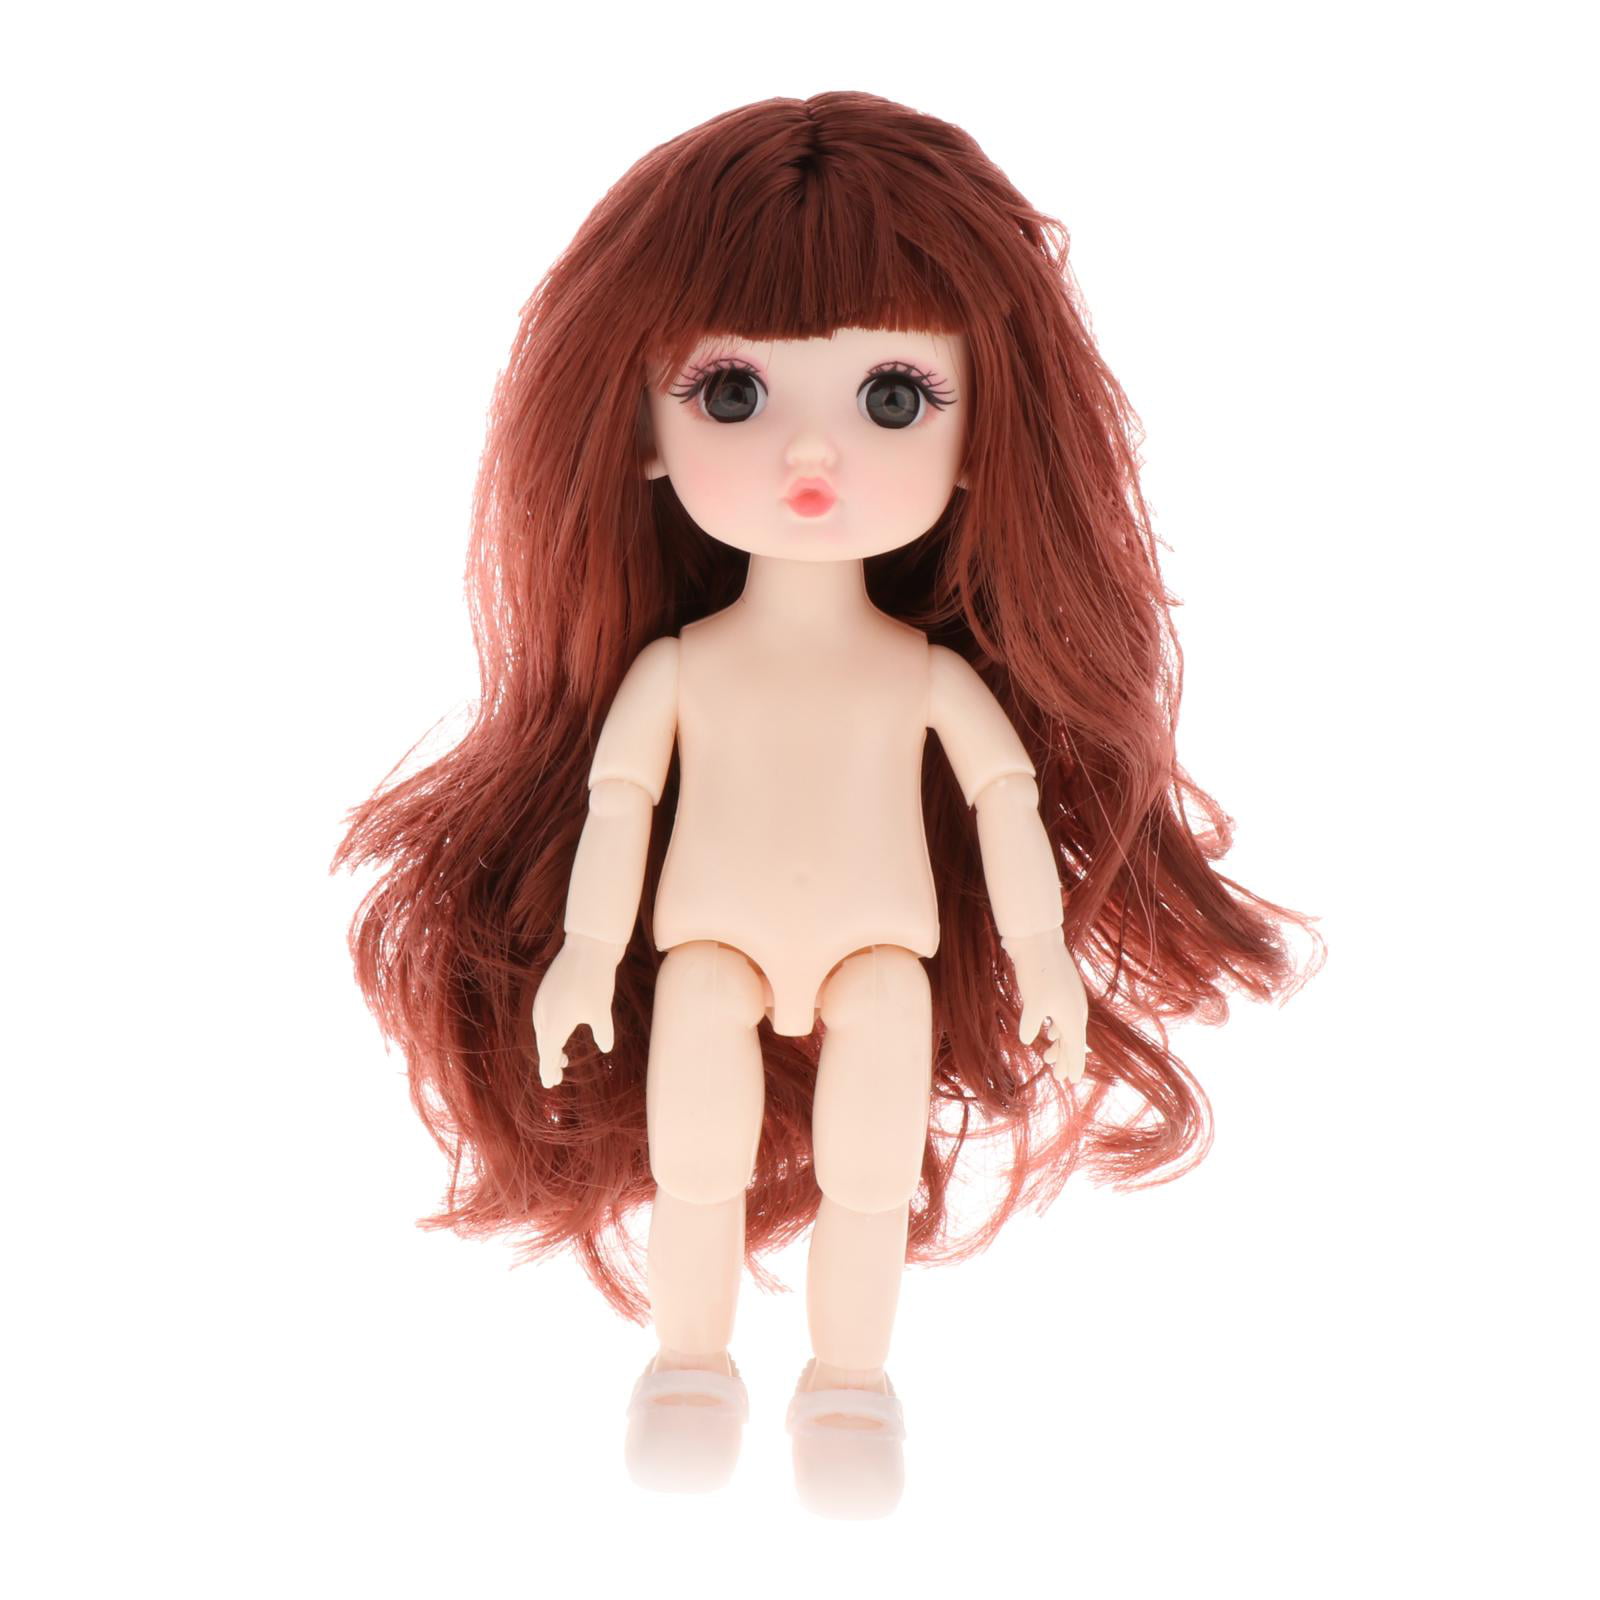 Nude 1/6 12 inch BJD Doll Moveable Ball Jointed Body Face Makeup Lifelike Toys